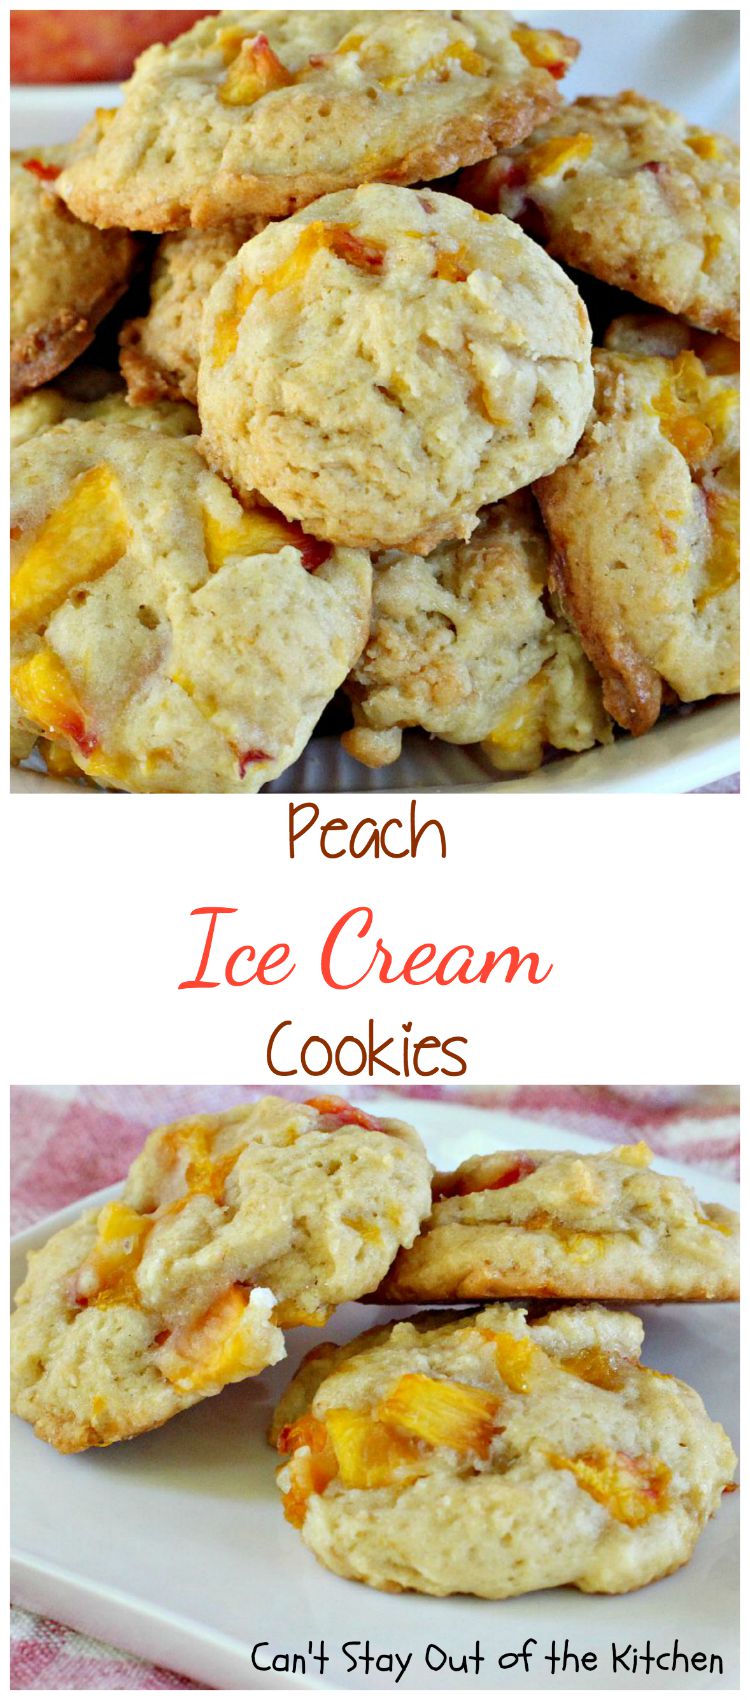 Peach Ice Cream Cookies | Can't Stay Out of the Kitchen | we LOVED these sensational #cookies. You'll never believe the secret ingredient is #icecream! #peaches #dessert